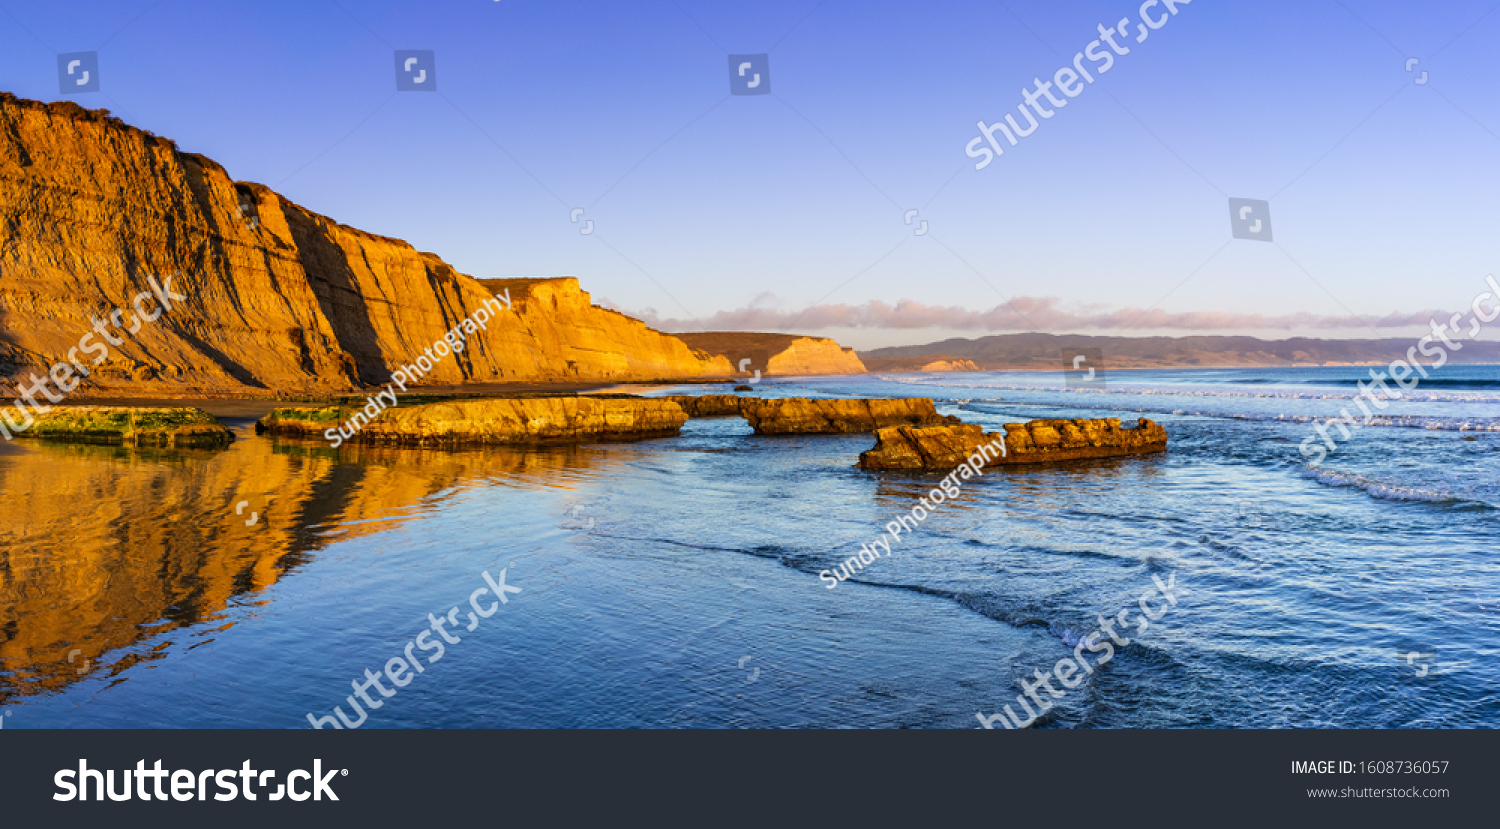 Sunset view of the Pacific Ocean shoreline, with golden colored cliffs reflected on the wet sand, Drakes Beach, Point Reyes National Seashore, California #1608736057